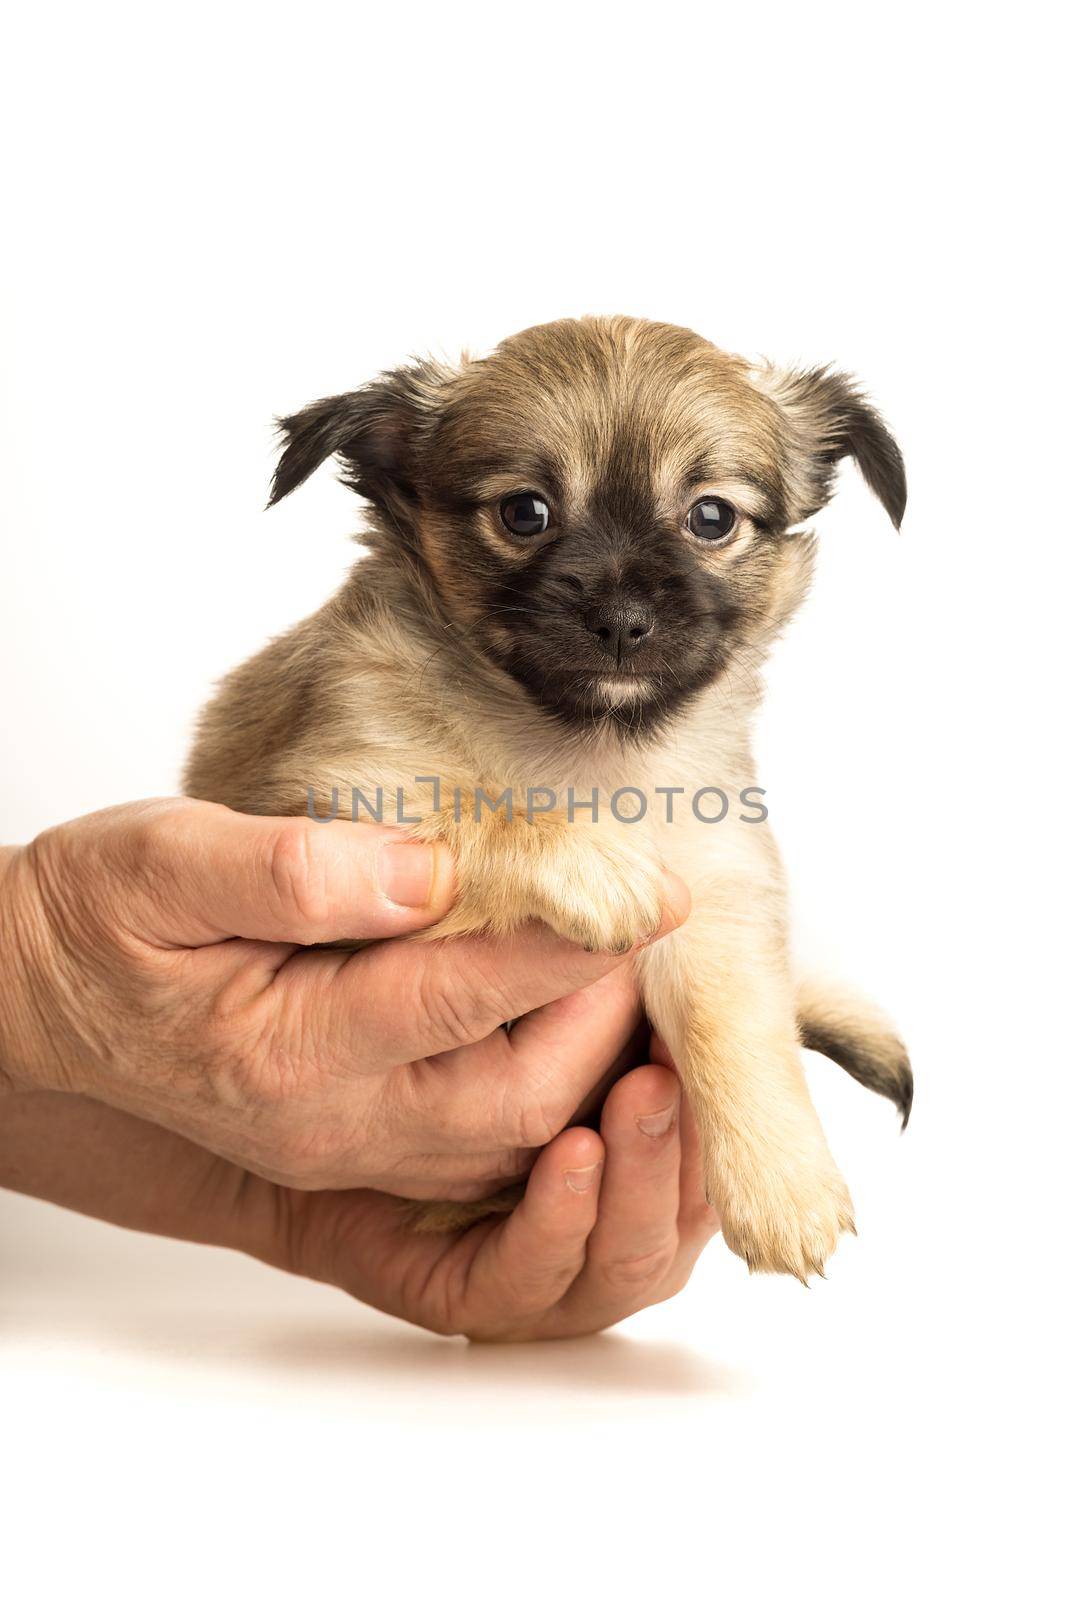 Cute little chihuahua puppy isolated in white background held in human hands by LeoniekvanderVliet